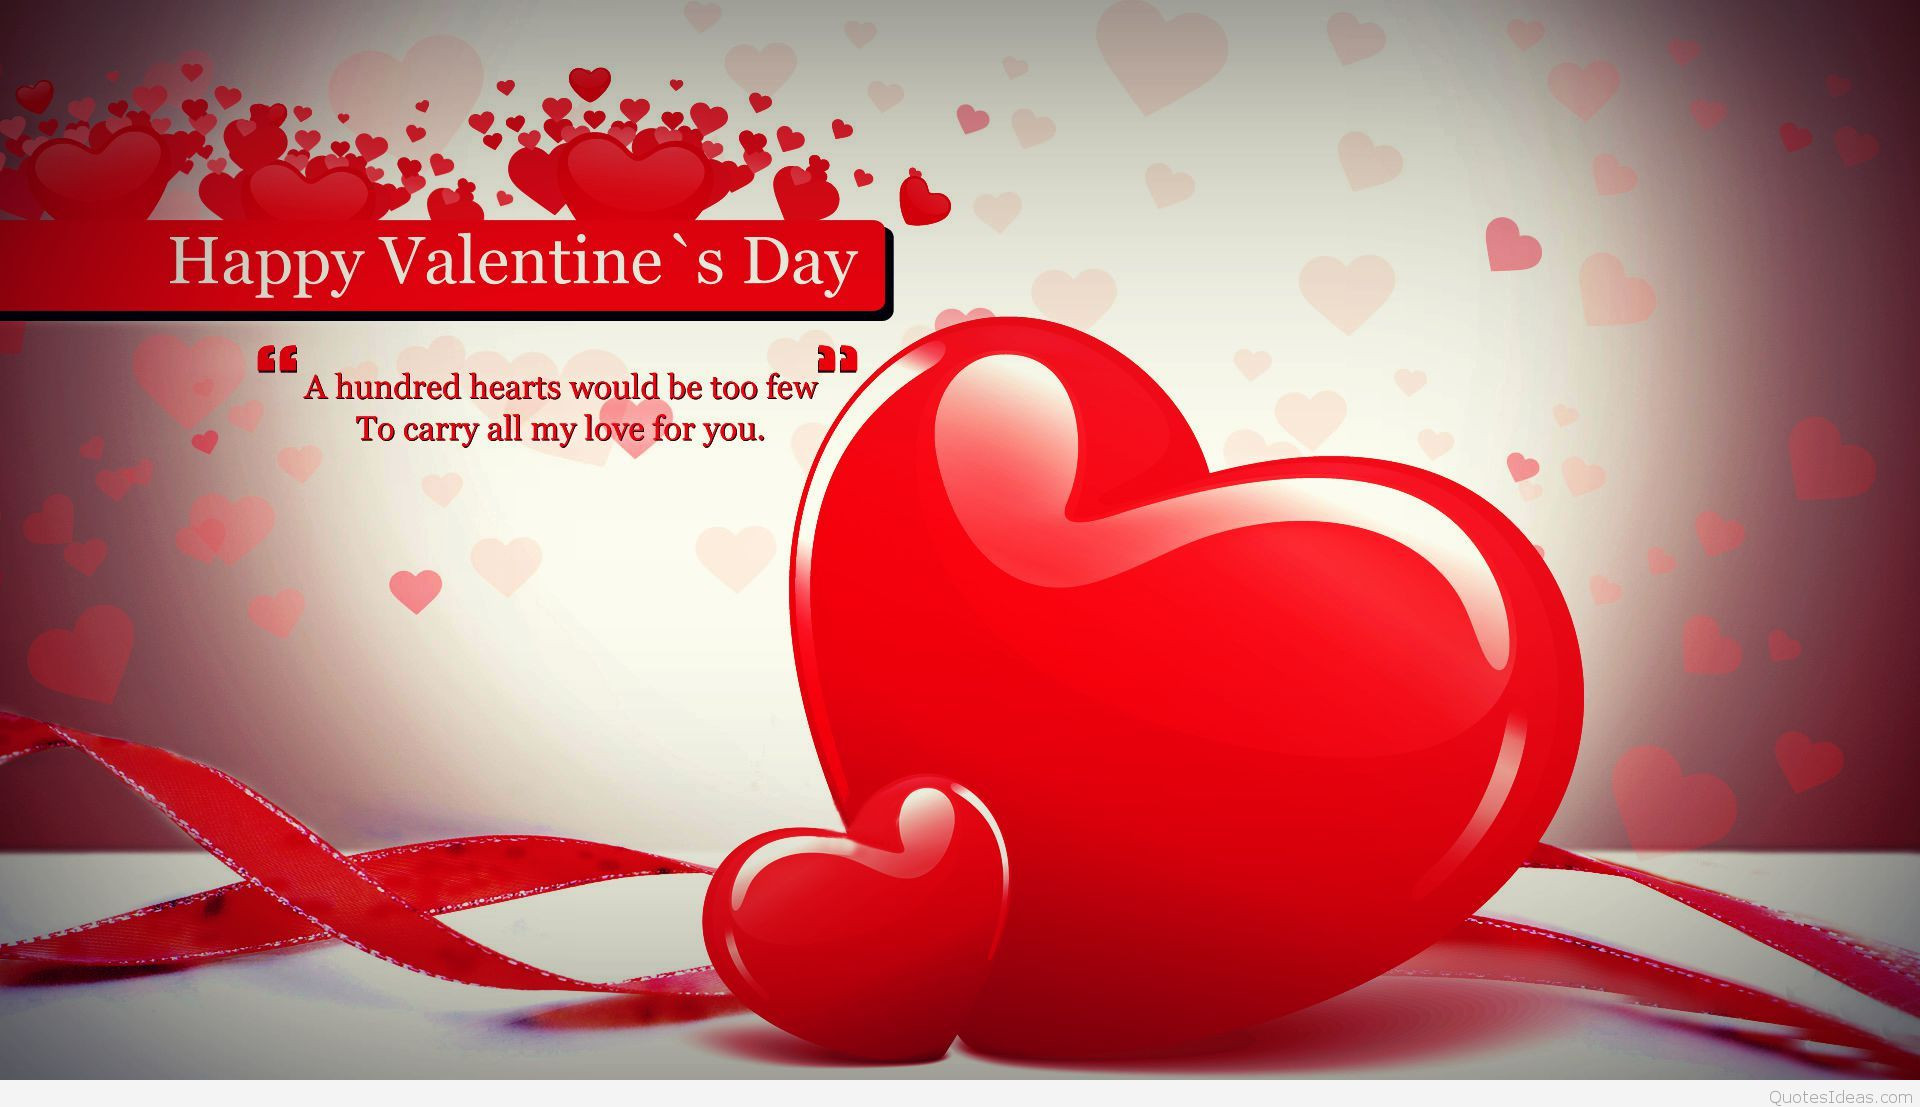 Happy Valentines Day Quotes For Her
 Happy Valentines Day Love Messages Best Quotes Hd Wallpaper